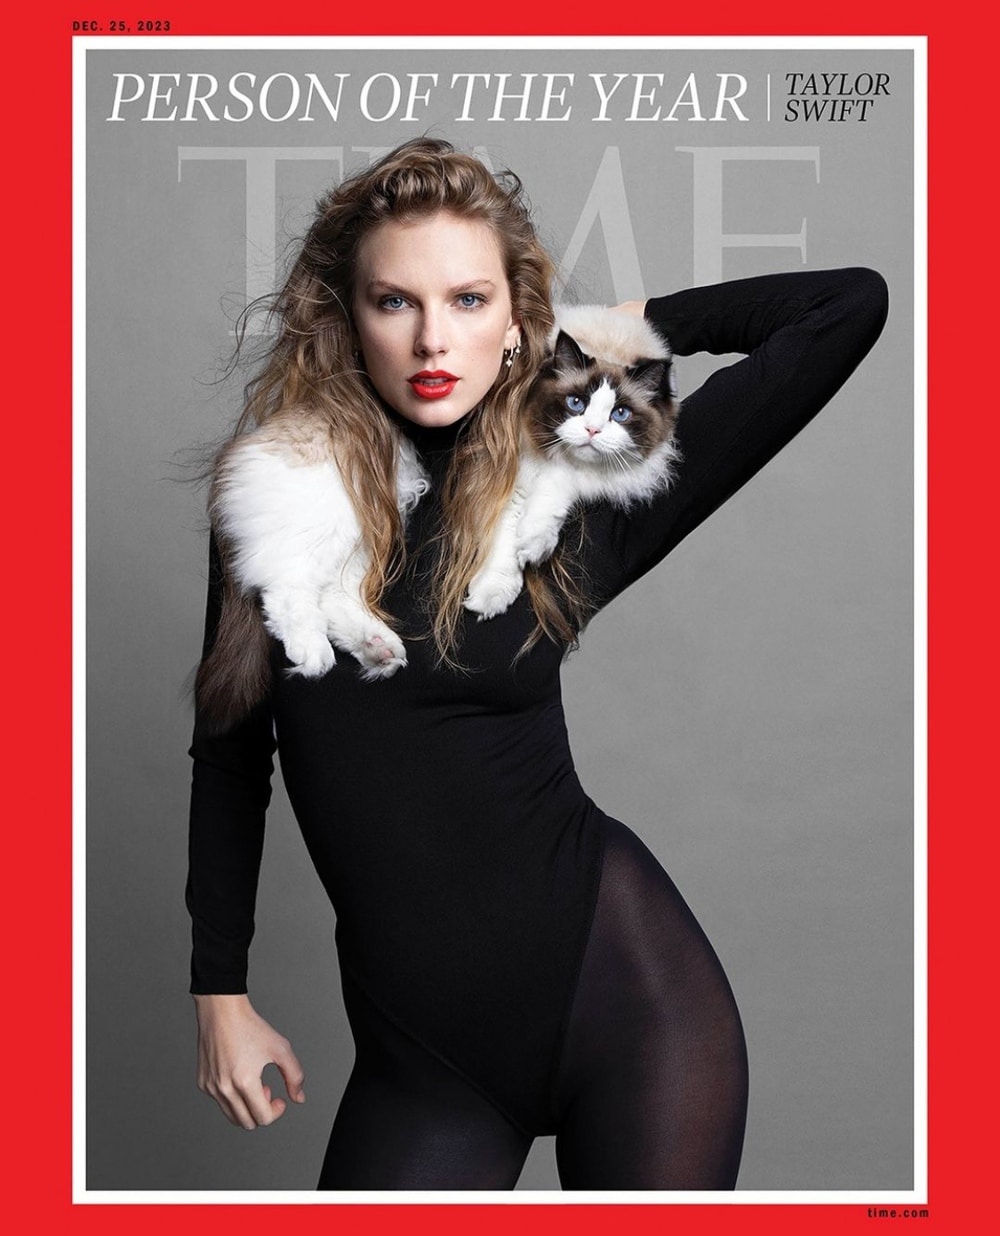 Taylor-Swift-time-person-of-the-year